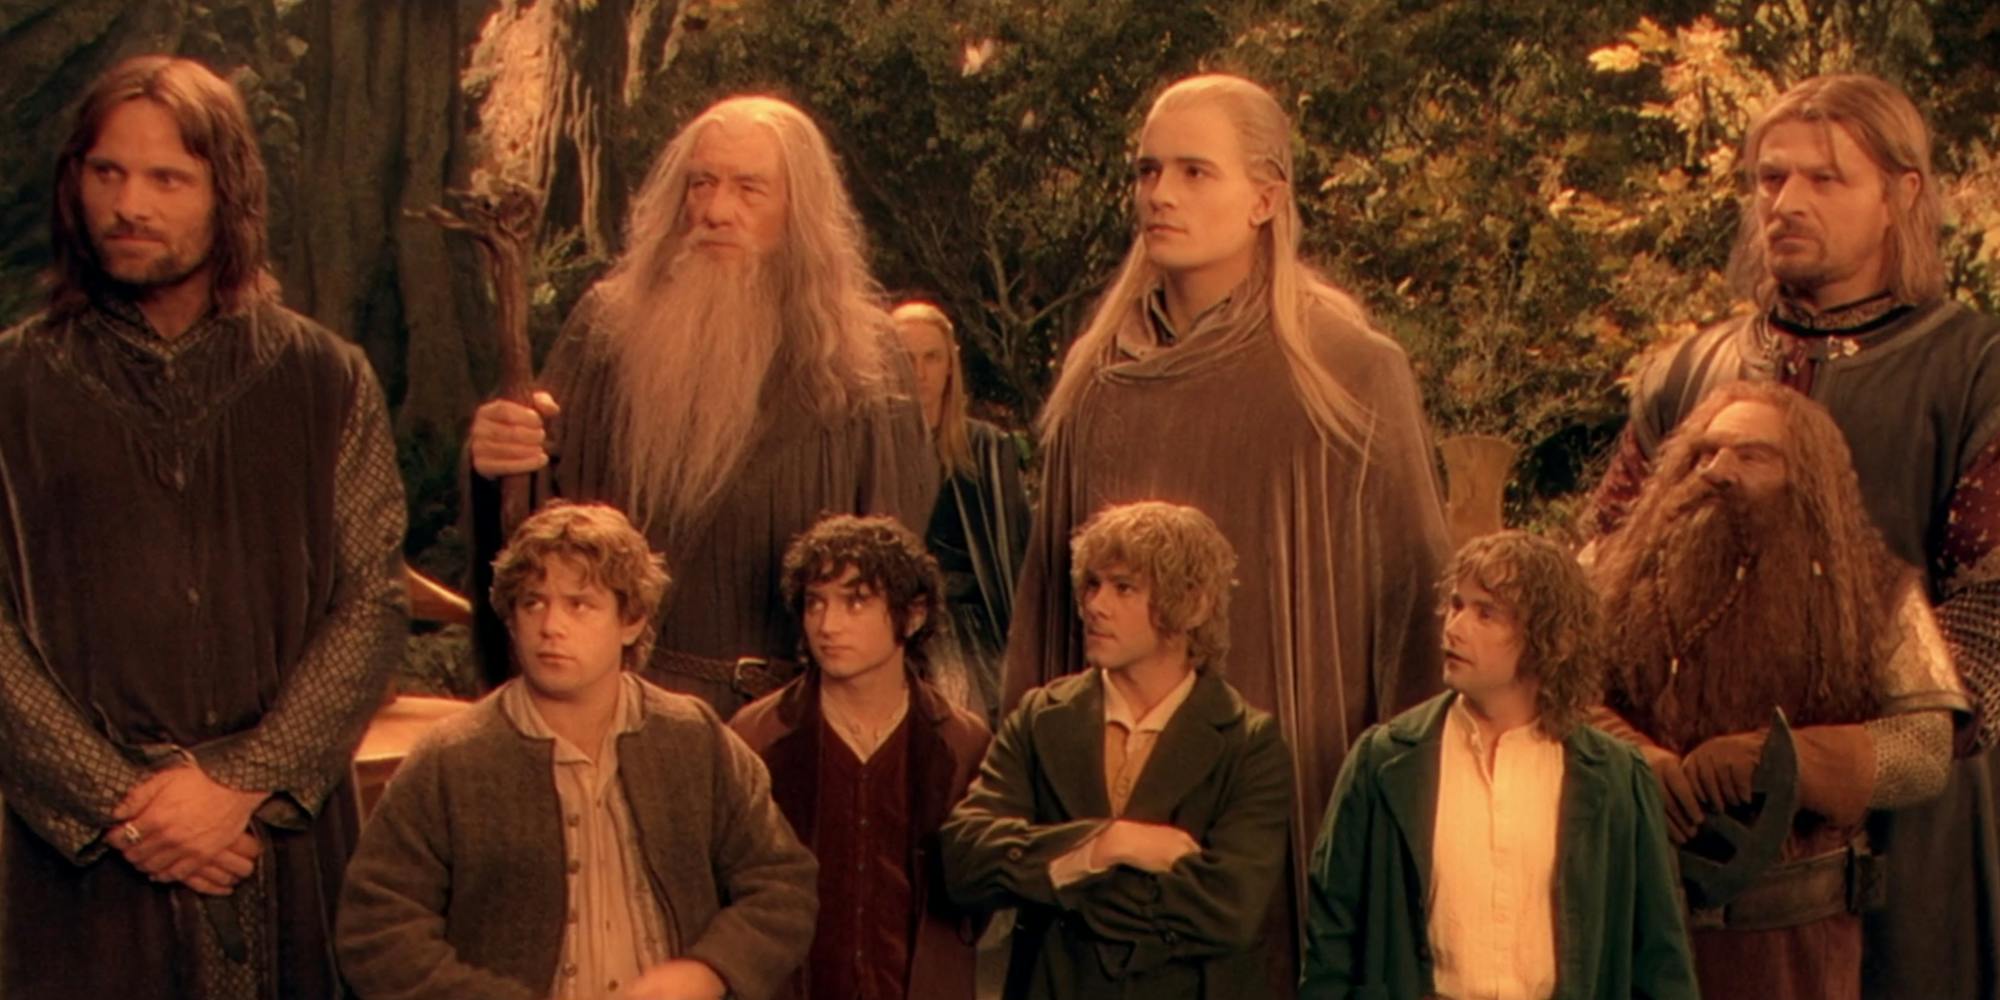 The Fellowship turns 20: a “The Lord of the Rings” retrospective